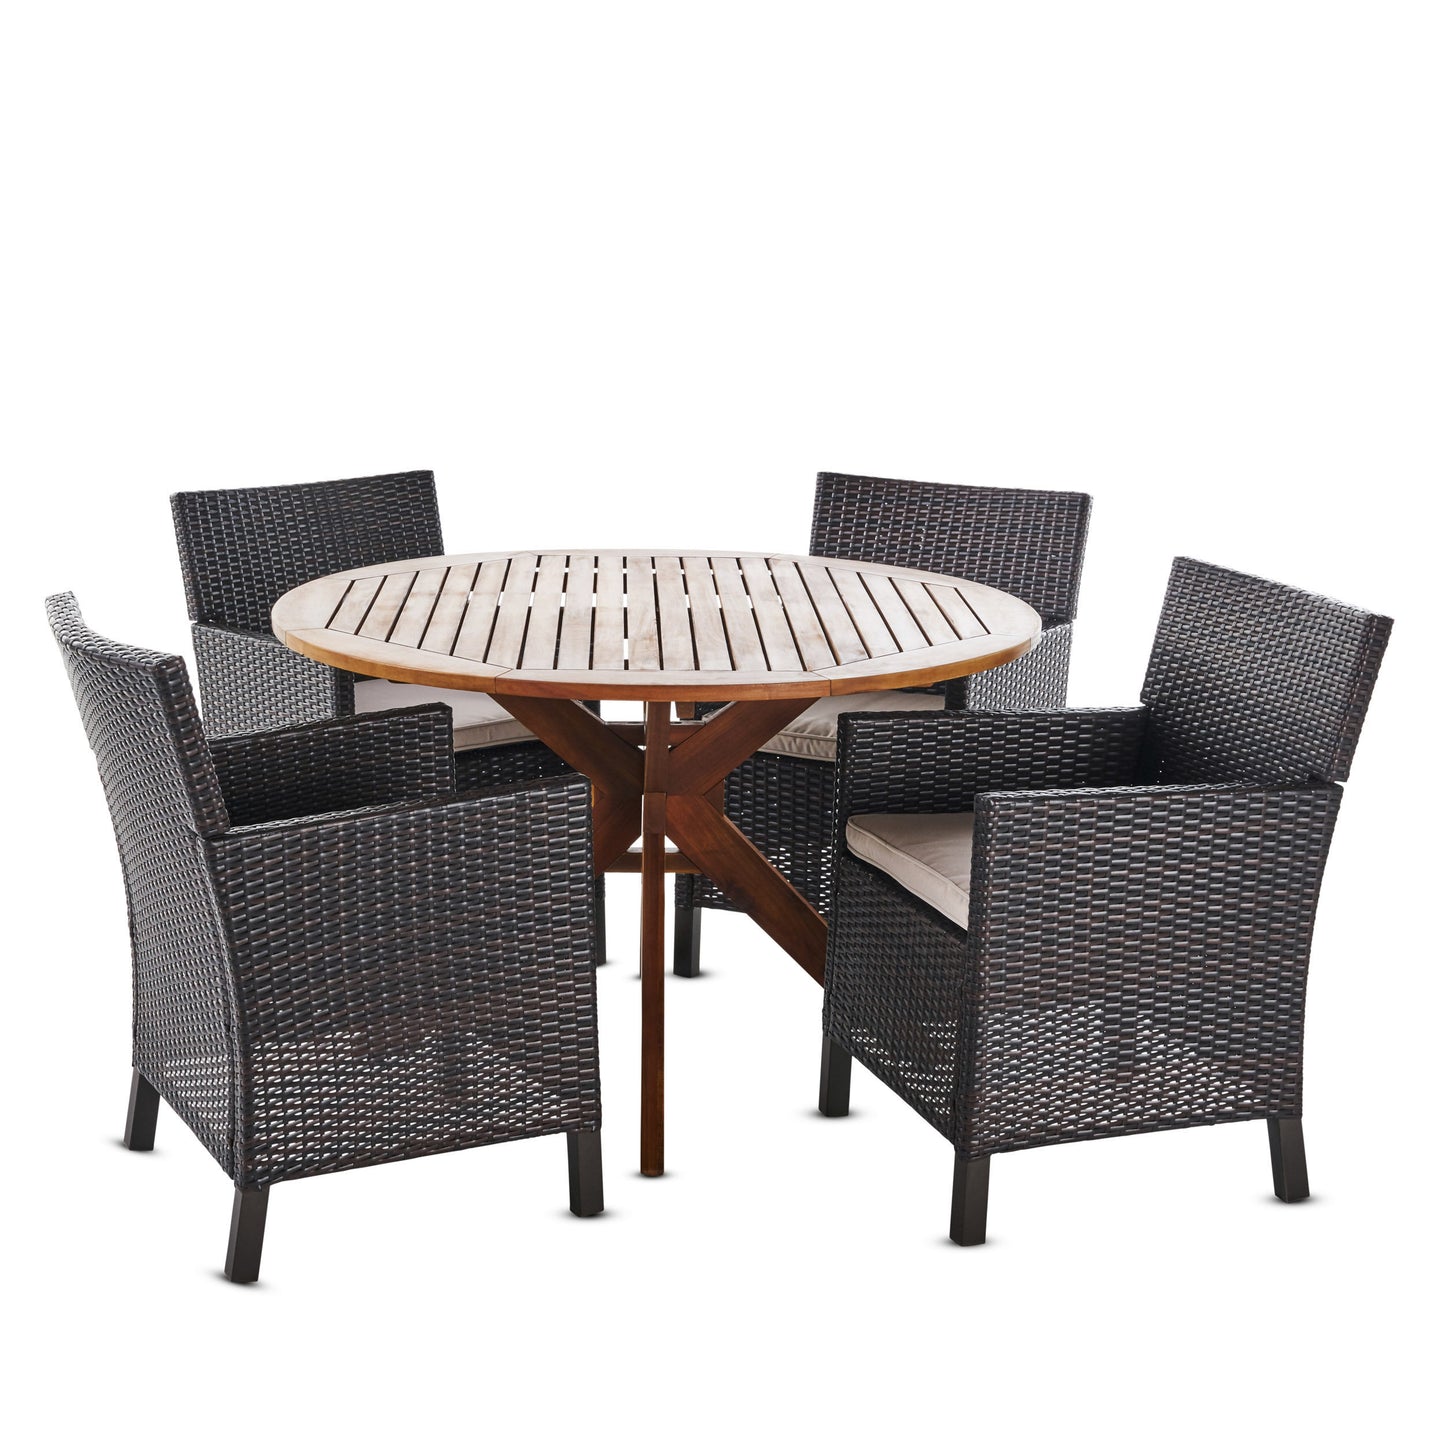 Orwel Outdoor 5 Piece Multi-brown Wicker Dining Set with Teak Finish Table